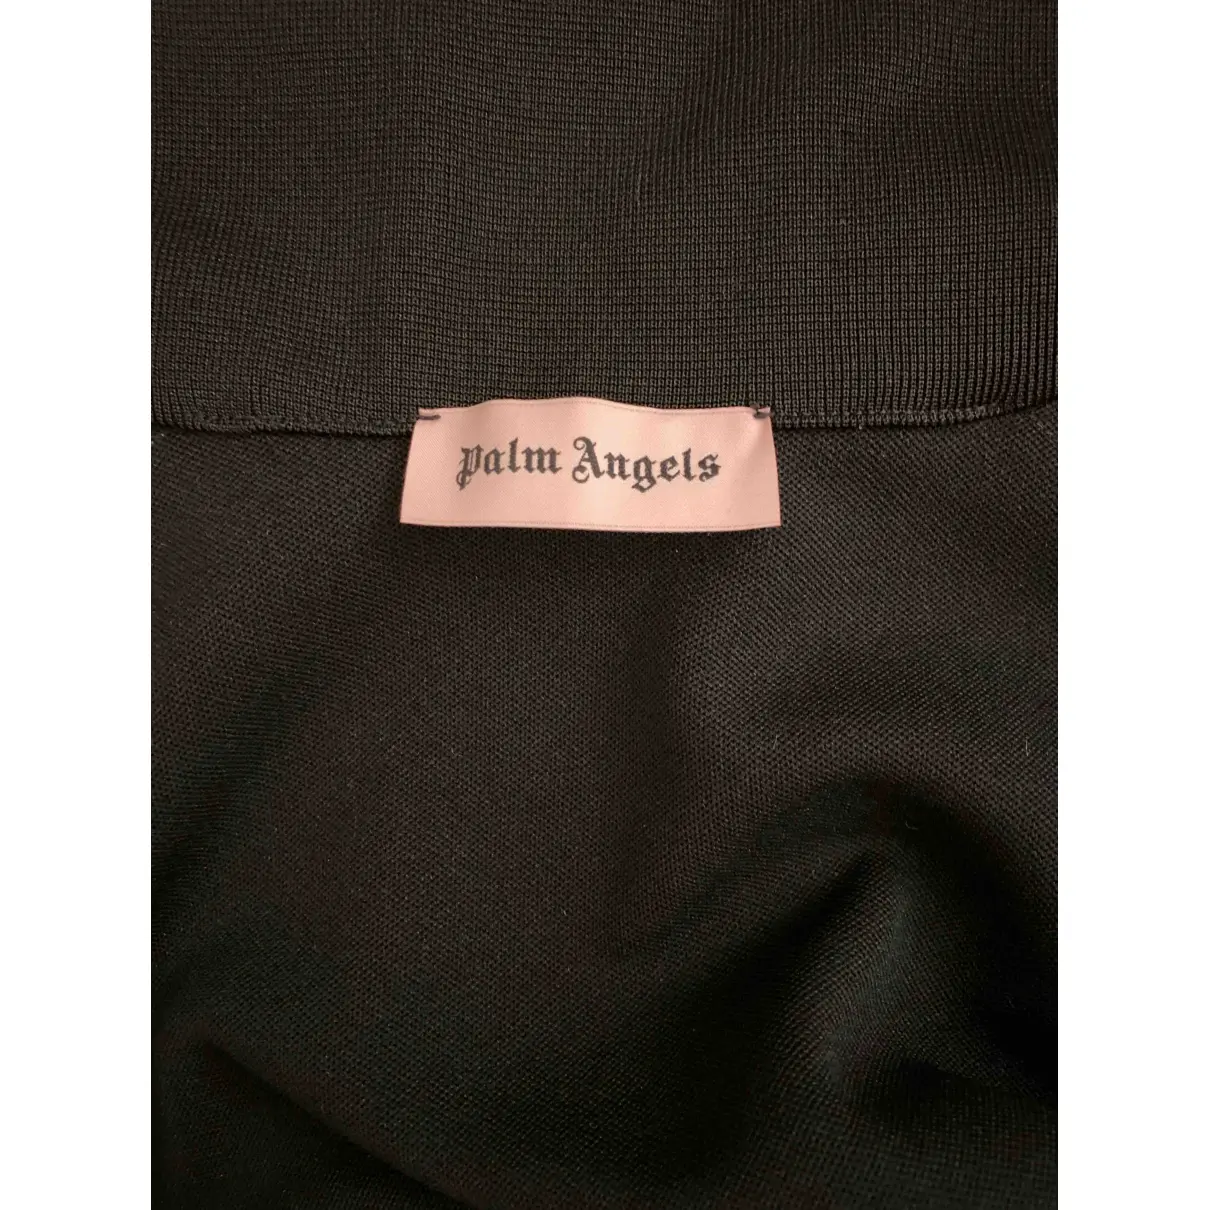 Black Synthetic Top Palm Angels